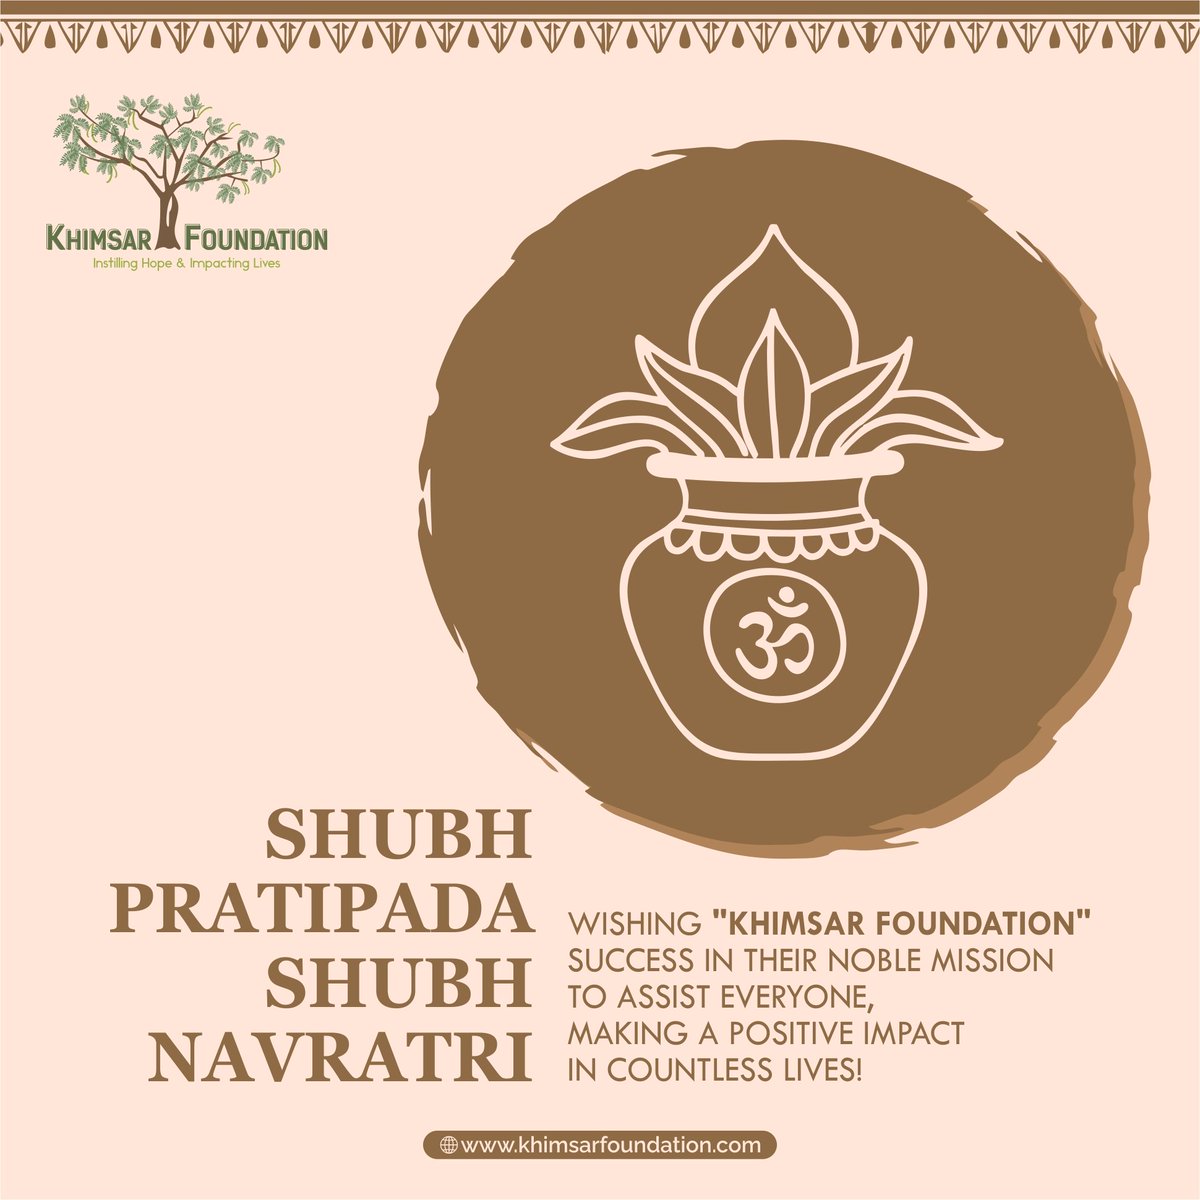 Warm wishes from Khimsar Foundation on Navratri Shubh Pratipada! May our initiative to bring countless smiles to countless people lead them towards better lives.

#Navratri #KhimsarFoundation #CountlessSmiles #BetterLives #InitiativeForChange